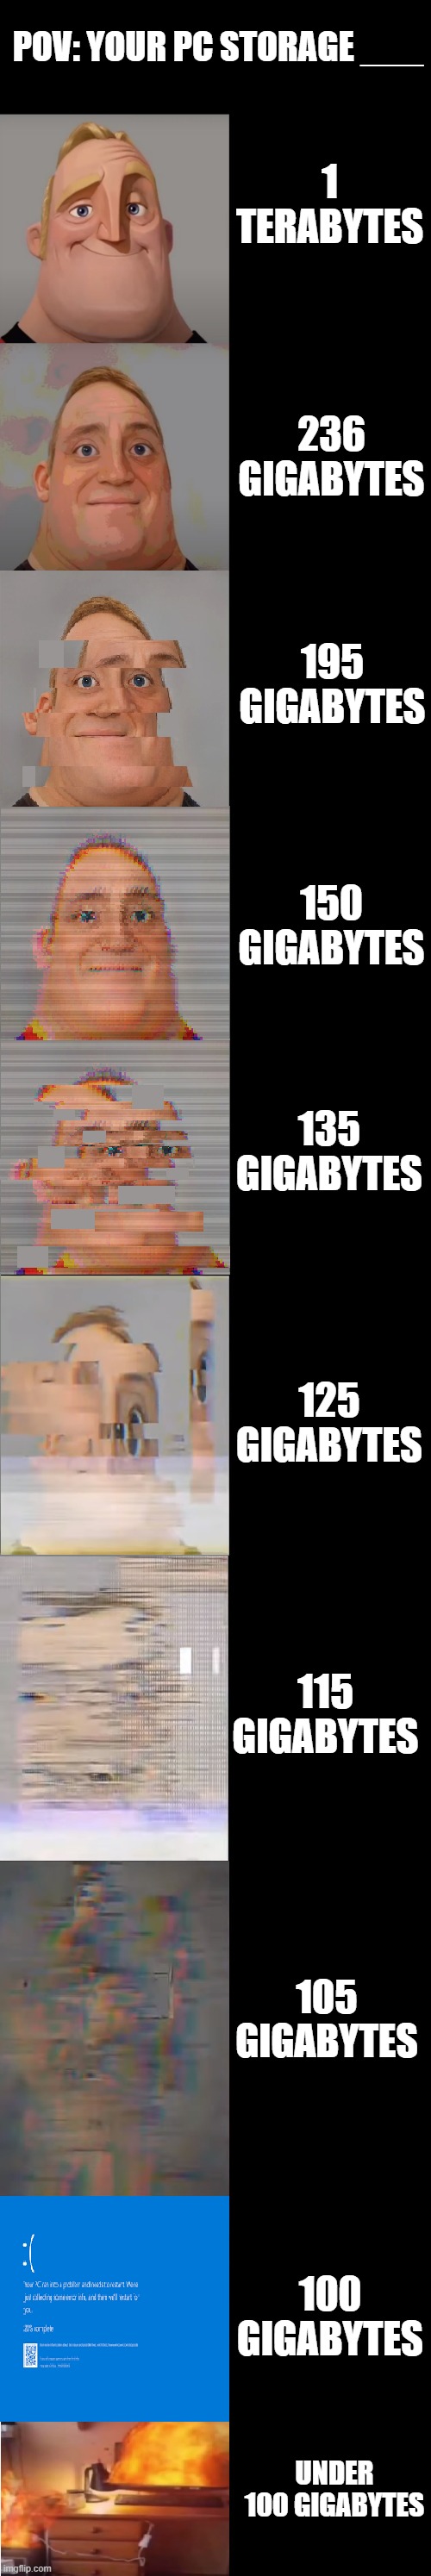 mr incredible becoming glitched POV: your pc storage ___ | POV: YOUR PC STORAGE ___; 1 TERABYTES; 236 GIGABYTES; 195 GIGABYTES; 150 GIGABYTES; 135 GIGABYTES; 125 GIGABYTES; 115 GIGABYTES; 105 GIGABYTES; 100 GIGABYTES; UNDER 100 GIGABYTES | image tagged in mr incredible becoming glitched template | made w/ Imgflip meme maker